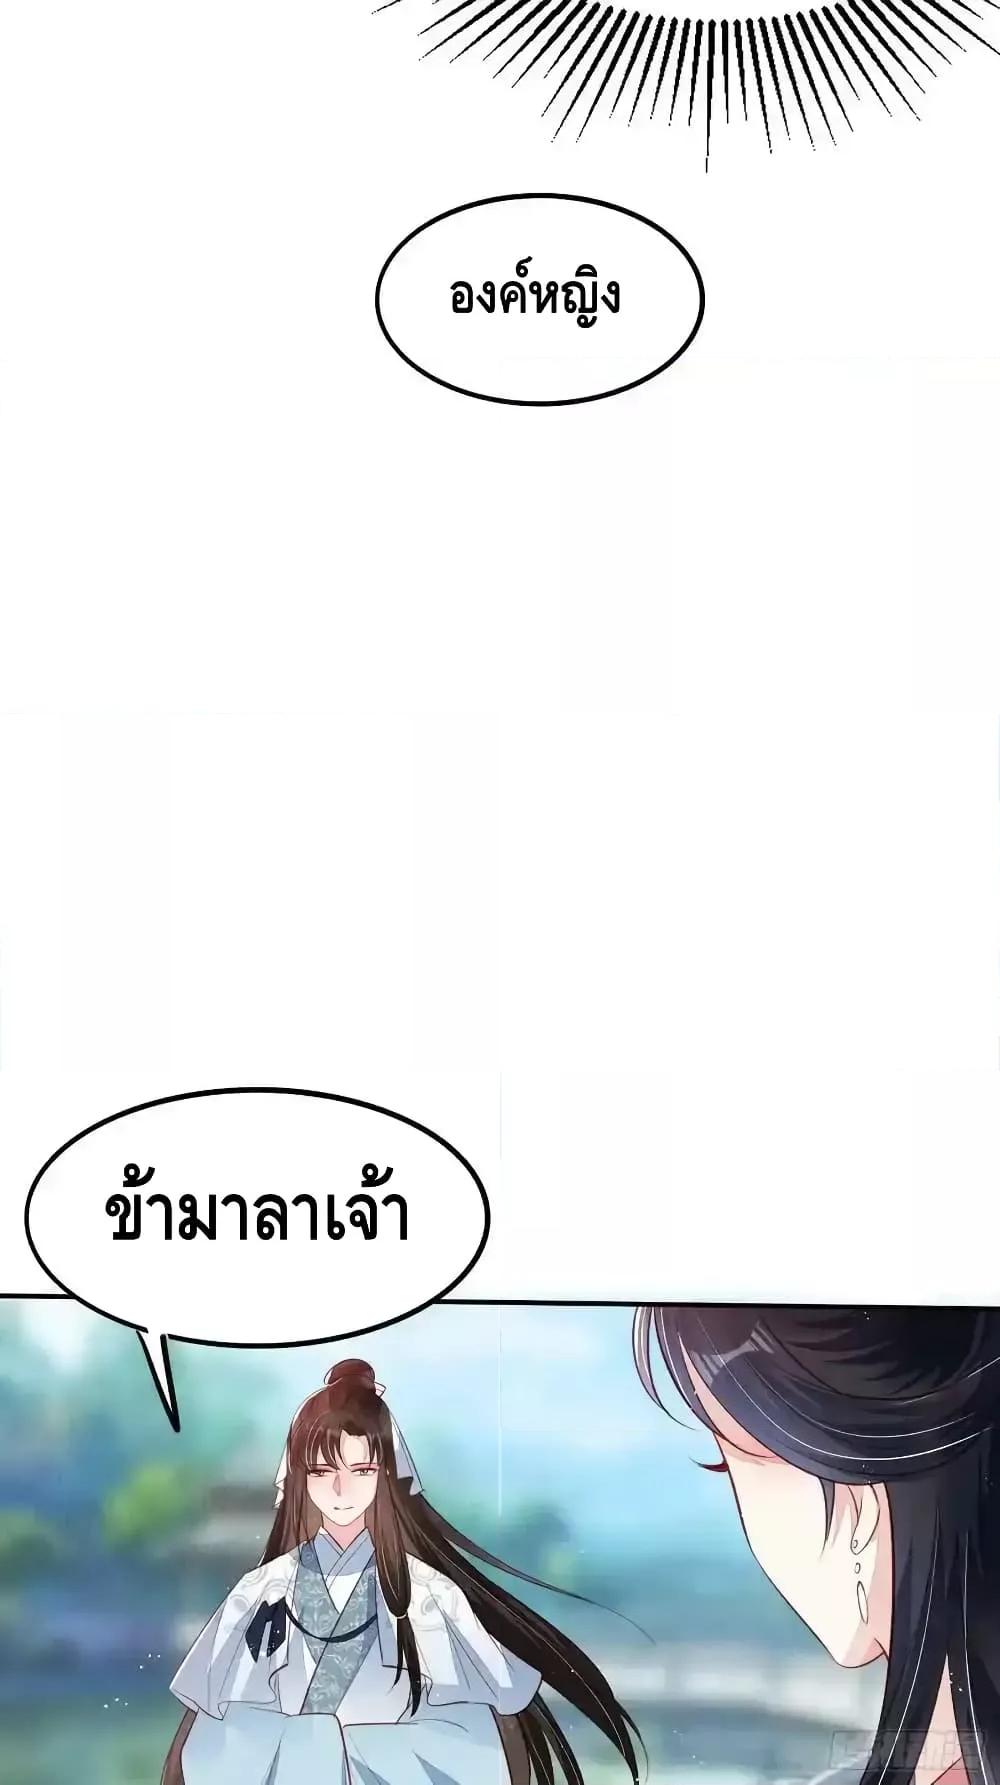 After I Bloom, a Hundred Flowers Will ill – ดอกไม้นับ ตอนที่ 70 (19)